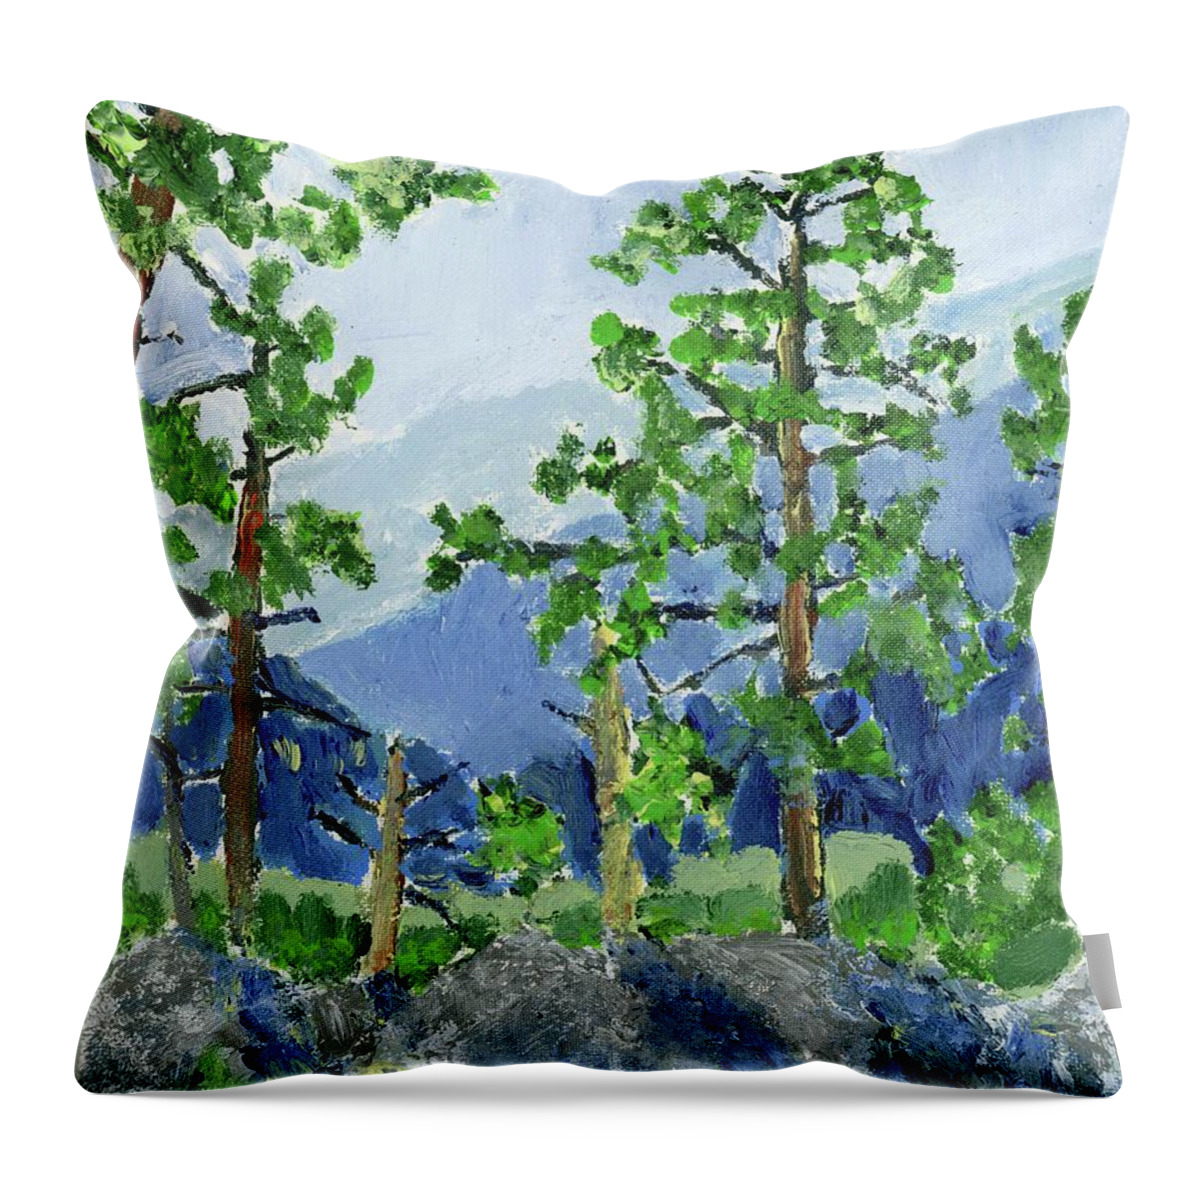 Mt. Rushmore Throw Pillow featuring the painting Iron Mountain Road by Rodger Ellingson